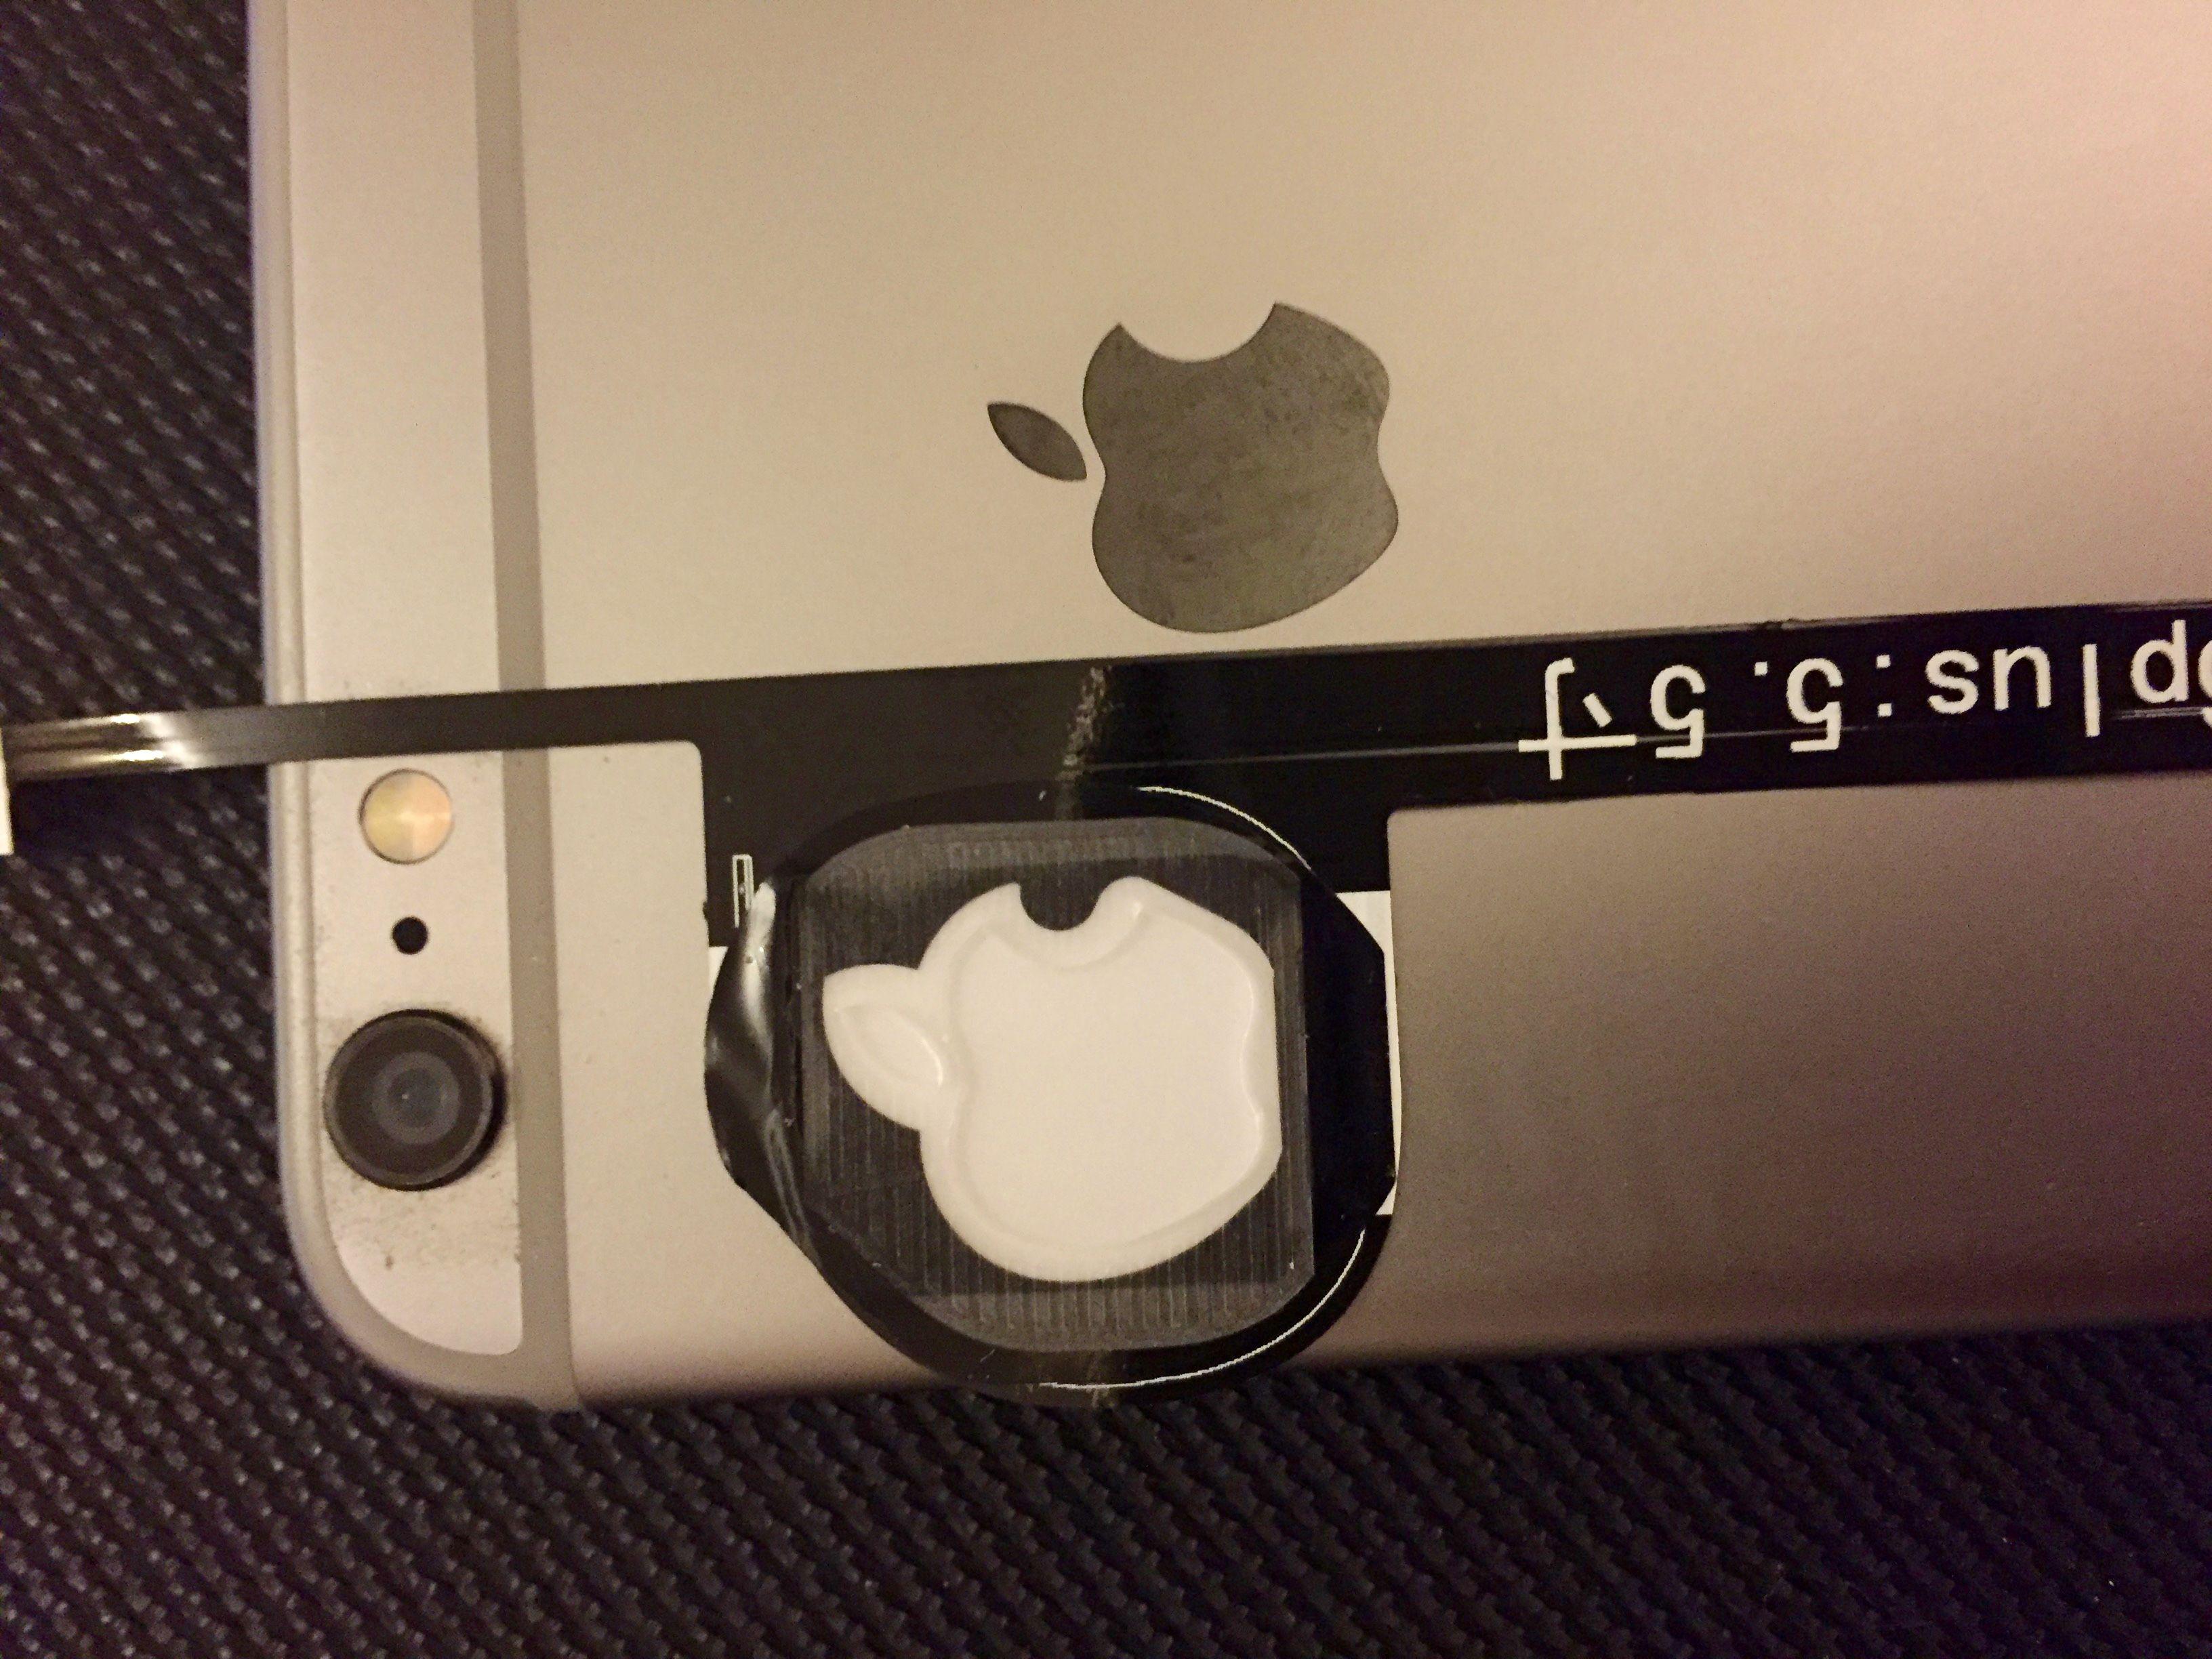 Apple Plus Logo - How to replace the Apple logo on iPhone 6 Plus with LED | TechWorm